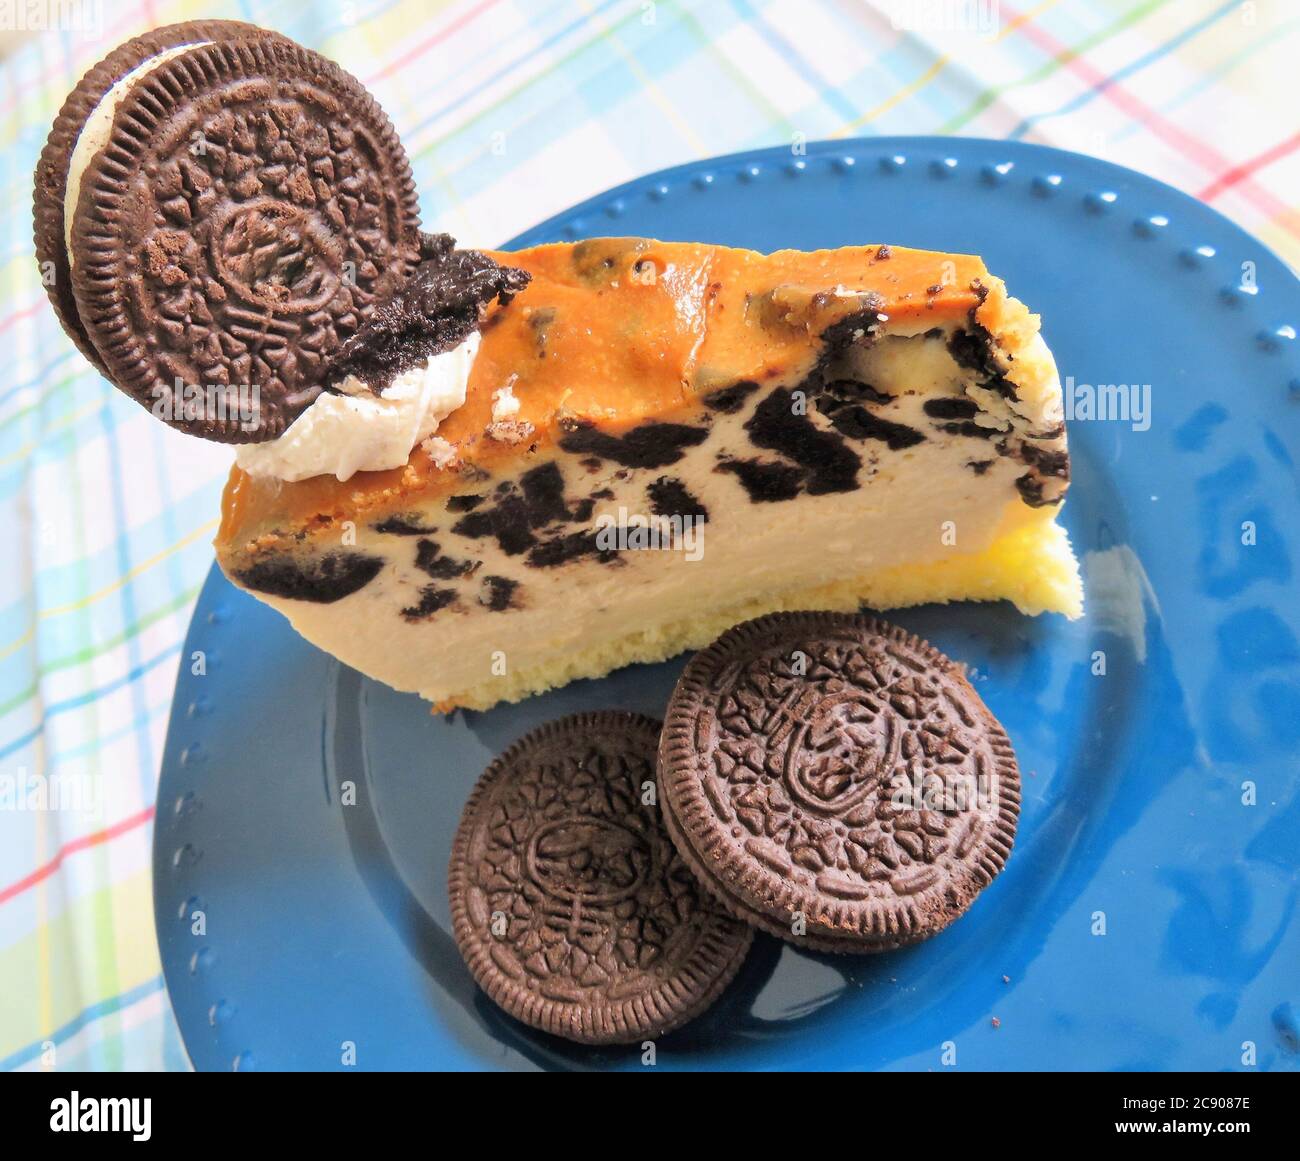 A cheesecake slice with chocolate sandwich cookies Stock Photo